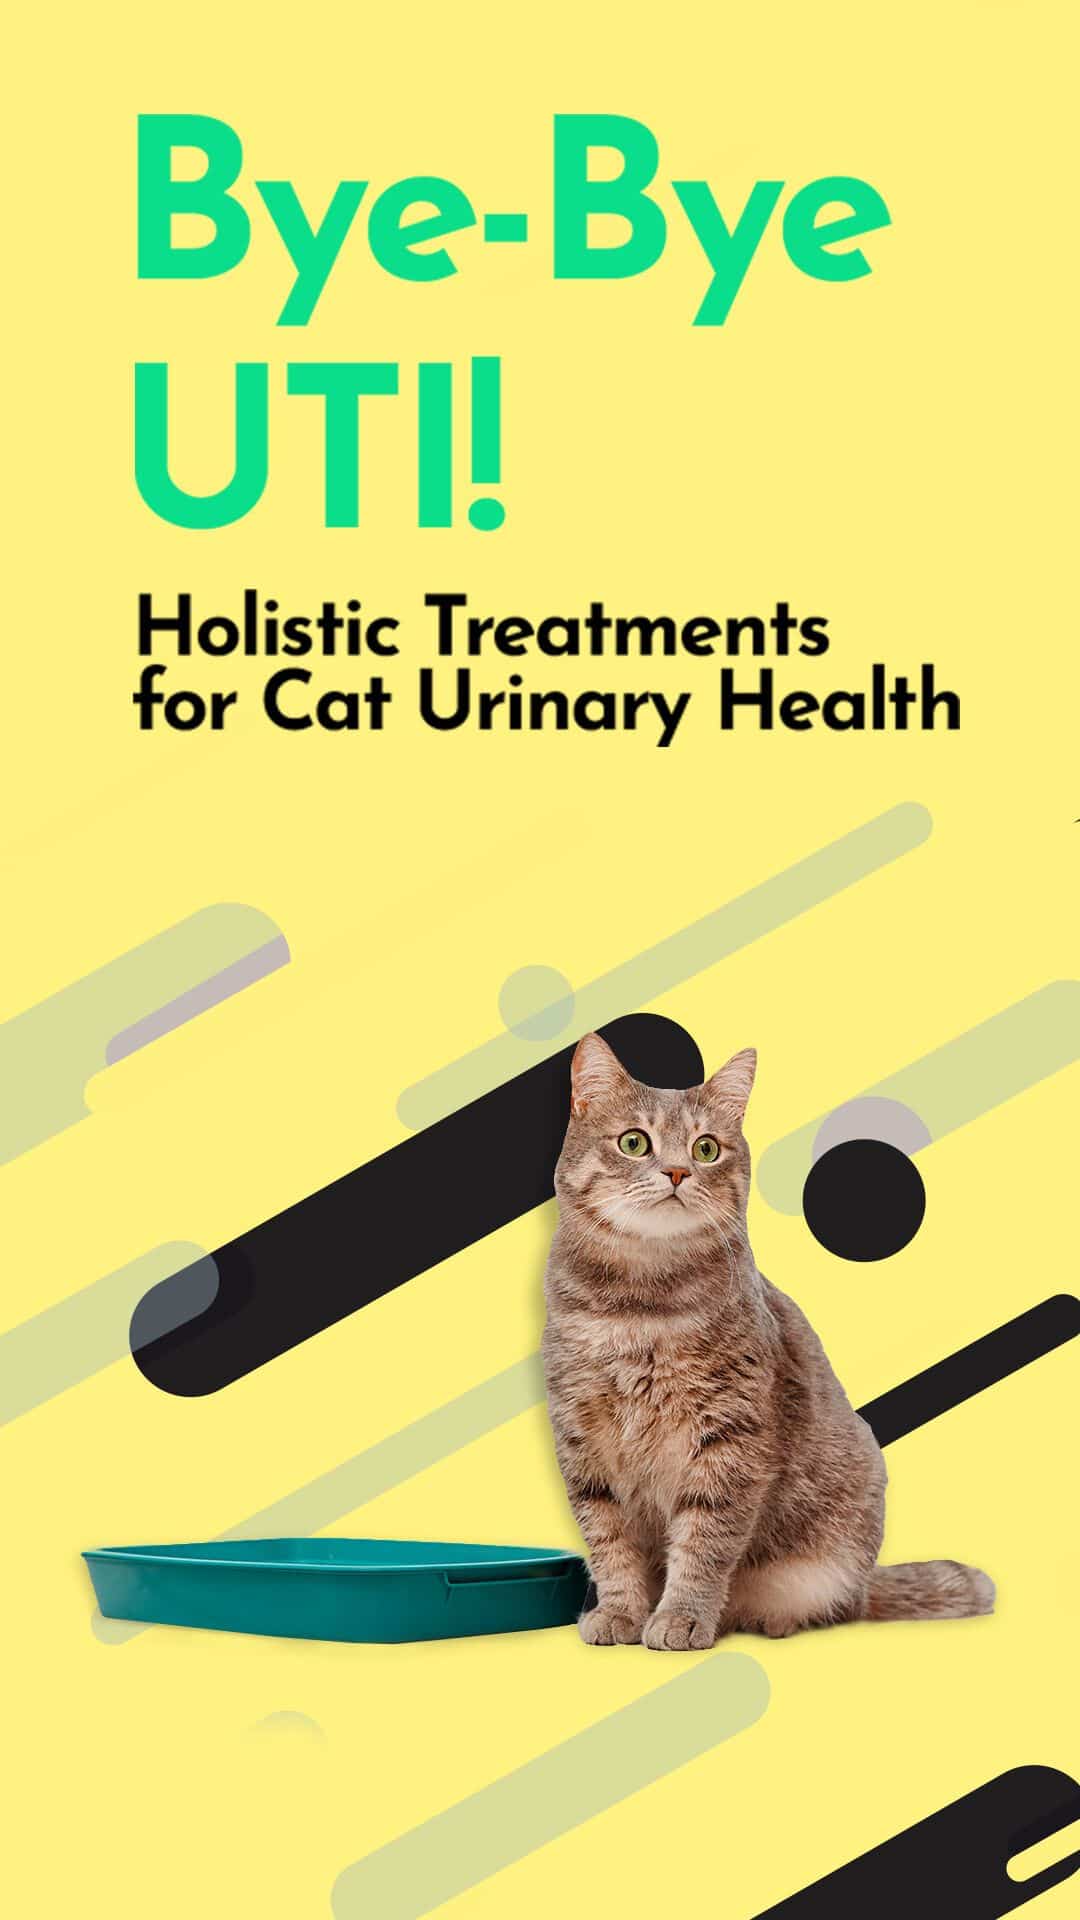 If youâre worried about your catâs urinary health, youâre not alone ...